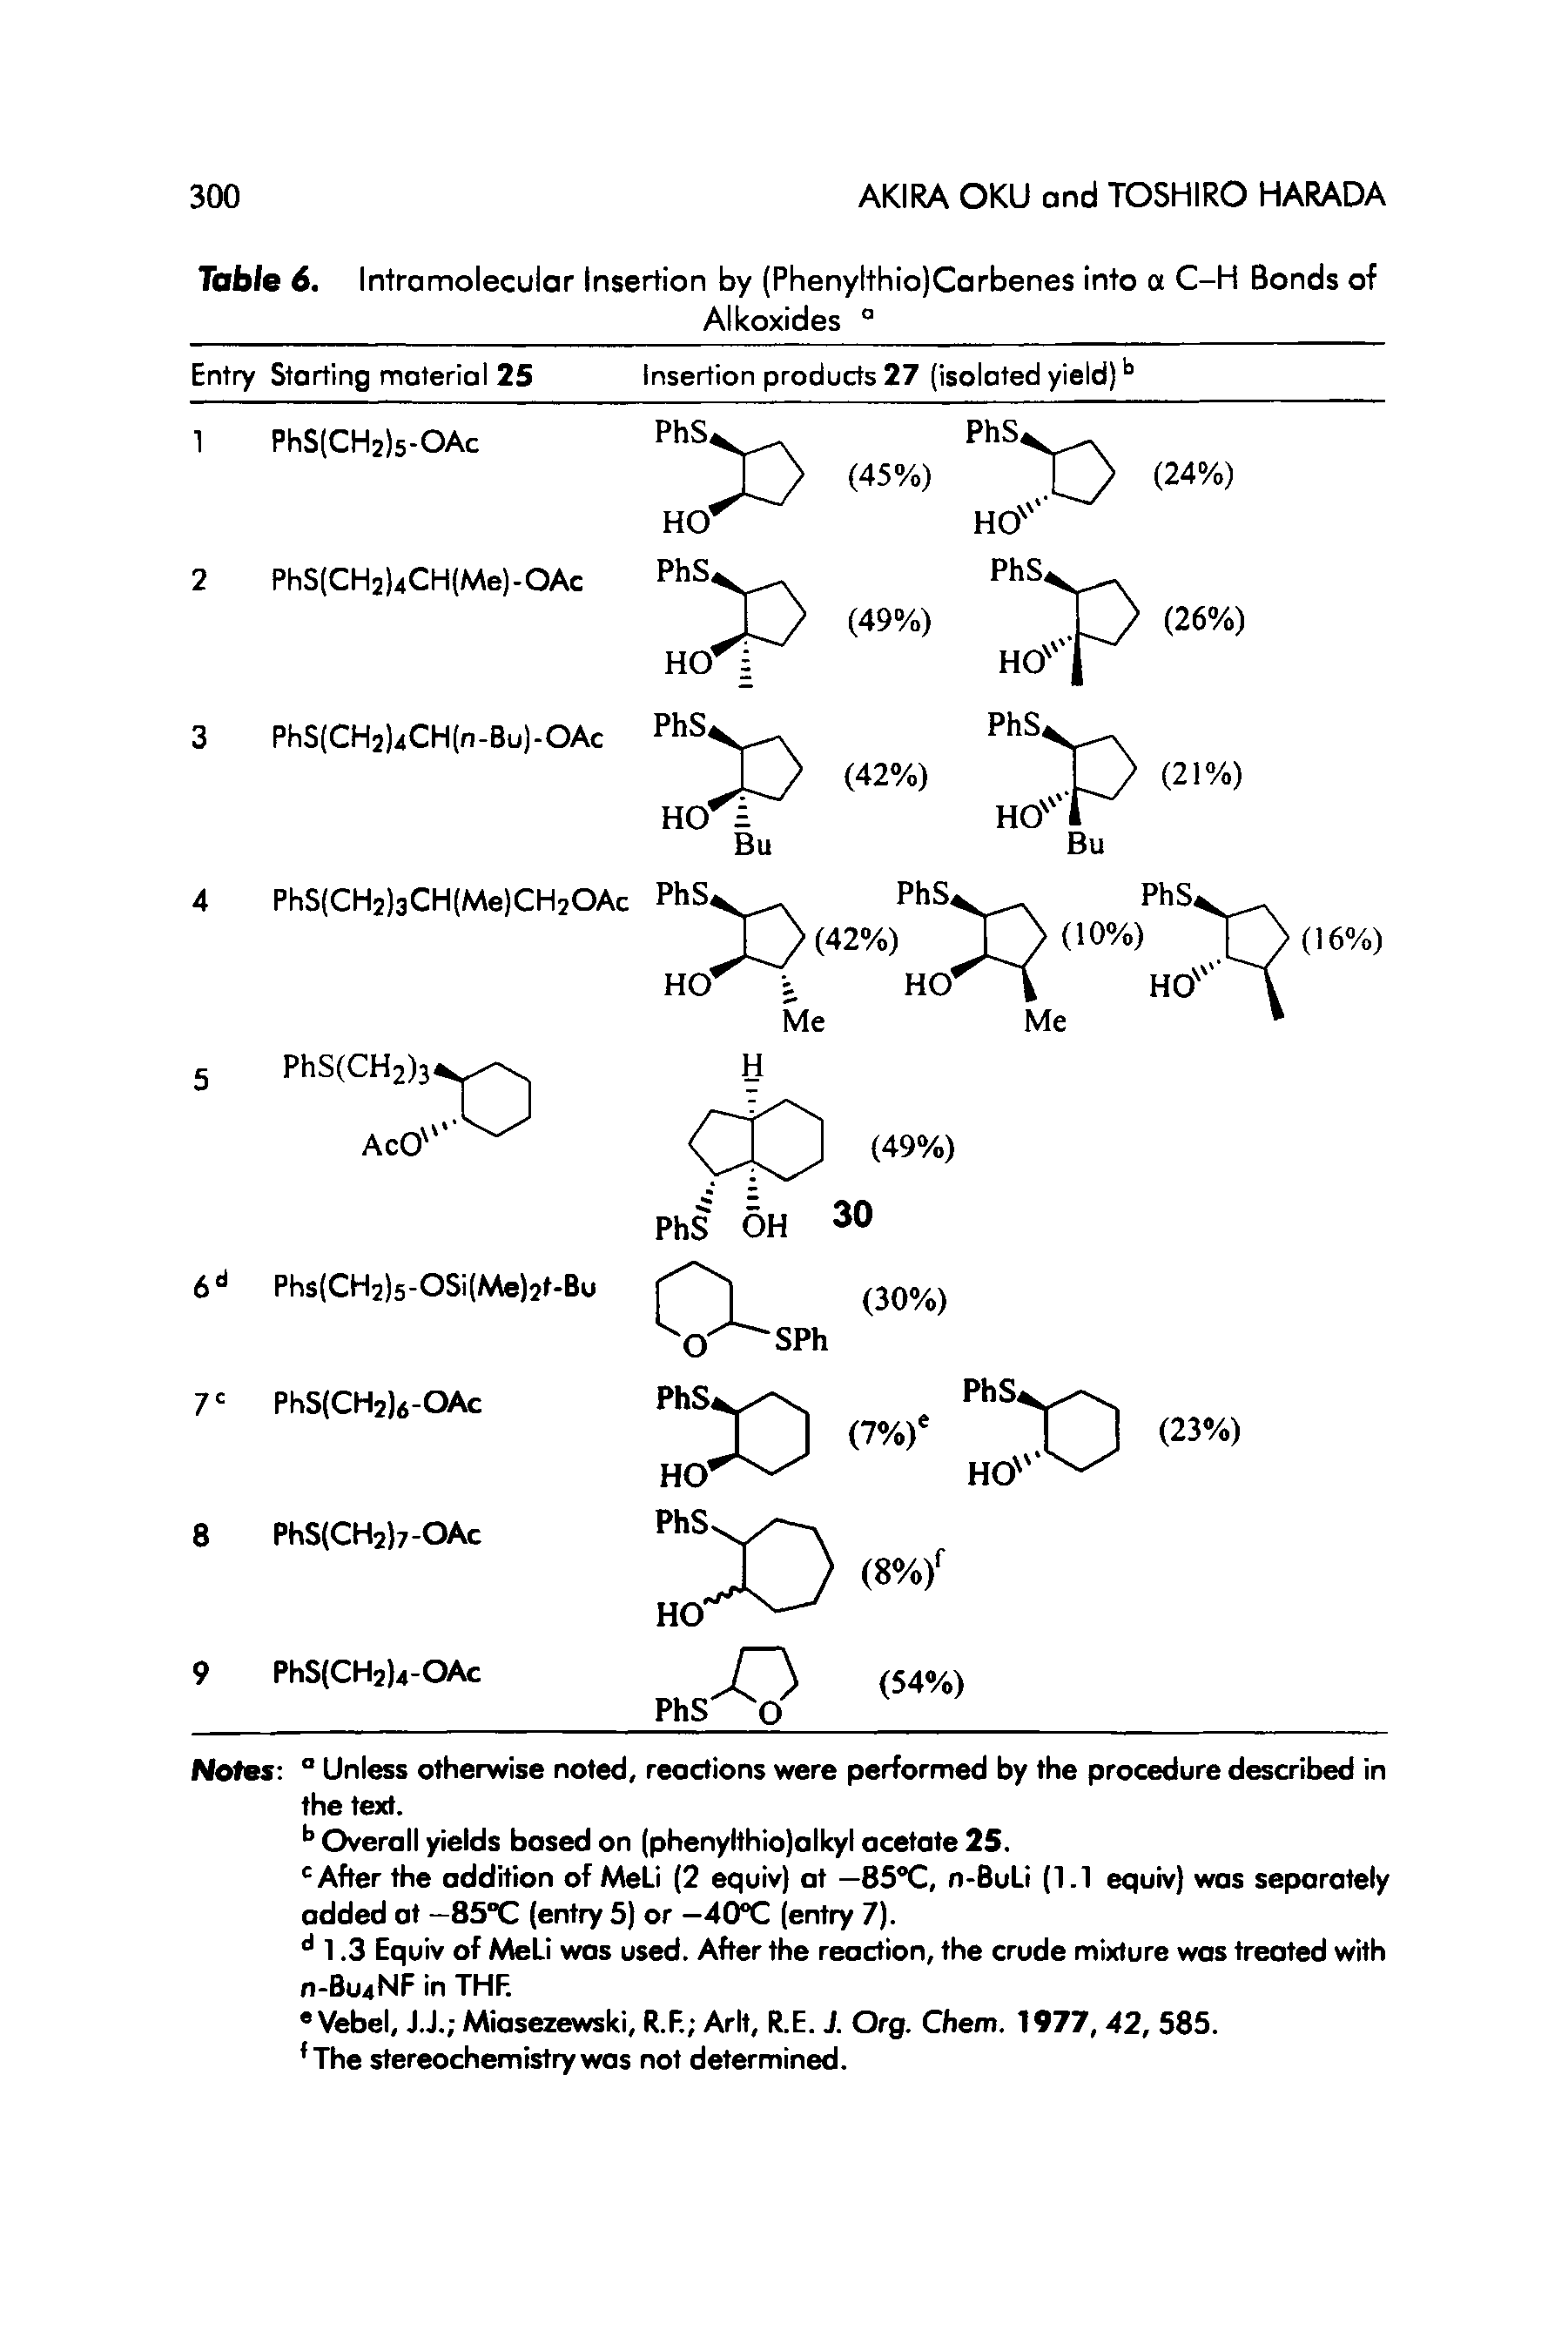 Table 6. Intramolecular Insertion by (Phenylthio)Carbenes into a C-H Bonds of...